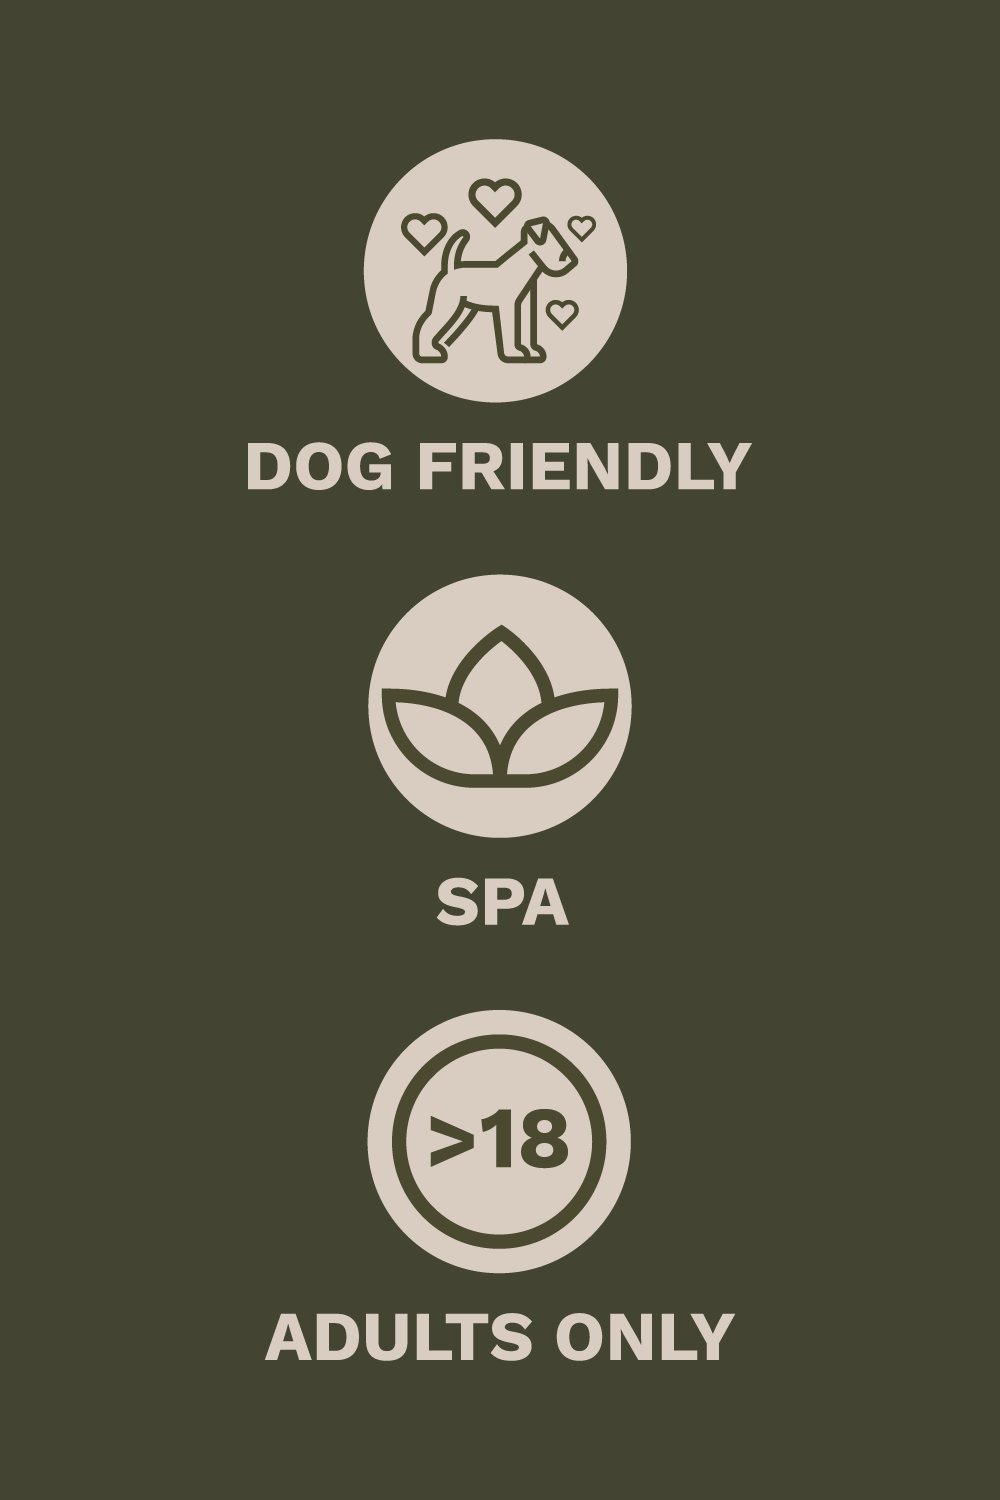 Three icons. From top down, a dog surrounded by hearts and text reads DOG FRIENDLY, a lotus flower with text reads SPA and a circle with text reads >18 and text reads ADULTS ONLY